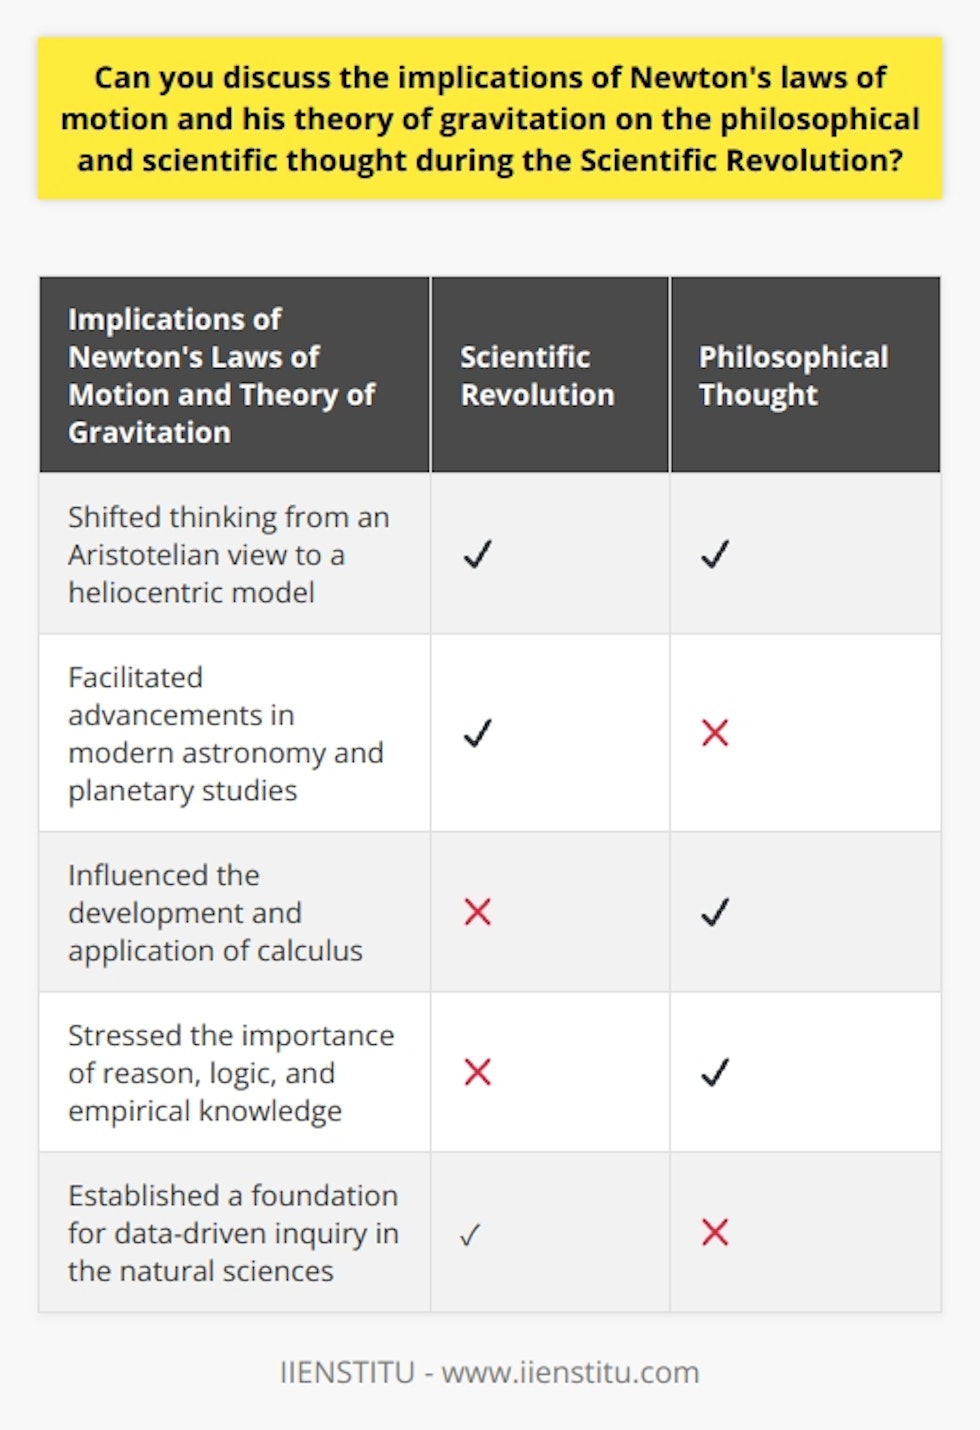 During the Scientific Revolution, Newton's laws of motion and theory of gravitation had significant implications on philosophical and scientific thought. Newton's universal law of gravitation challenged the prevailing Aristotelian view of the cosmos and introduced a heliocentric model. This shift in thinking gave rise to modern astronomy and facilitated advancements in planetary studies.Furthermore, Newton's laws of motion influenced the development of analytical mathematics, particularly the invention and application of calculus. This branch of mathematics allowed for the analysis of patterns of change and the study of physical phenomena. Calculus became a crucial tool for exploring various physical and astronomical processes.Newton's work also made a substantial contribution to Enlightenment philosophy. This intellectual movement valued reason, logic, and empirical knowledge, traits exemplified by Newton's scientific methods. His emphasis on testable and observable aspects of the natural world diverted philosophy from speculation and metaphysics, paving the way for modern philosophy.The implications of Newton's laws and theory of gravitation extended to scientific practice as well. By employing mathematical reasoning, observations, and experiments, Newton created hypotheses that could be verified and scrutinized. This empirical approach solidified the importance of data-driven inquiry in the natural sciences and established a foundation for future researchers.In conclusion, Newton's laws of motion and theory of gravitation shaped philosophical and scientific thought during the Scientific Revolution. His new understanding of the cosmos, advancement of analytical mathematics, and contribution to Enlightenment philosophy had a lasting impact on scientific research. Newton's legacy laid the groundwork for future progress in science, mathematics, and philosophy, revolutionizing these fields as we know them today.